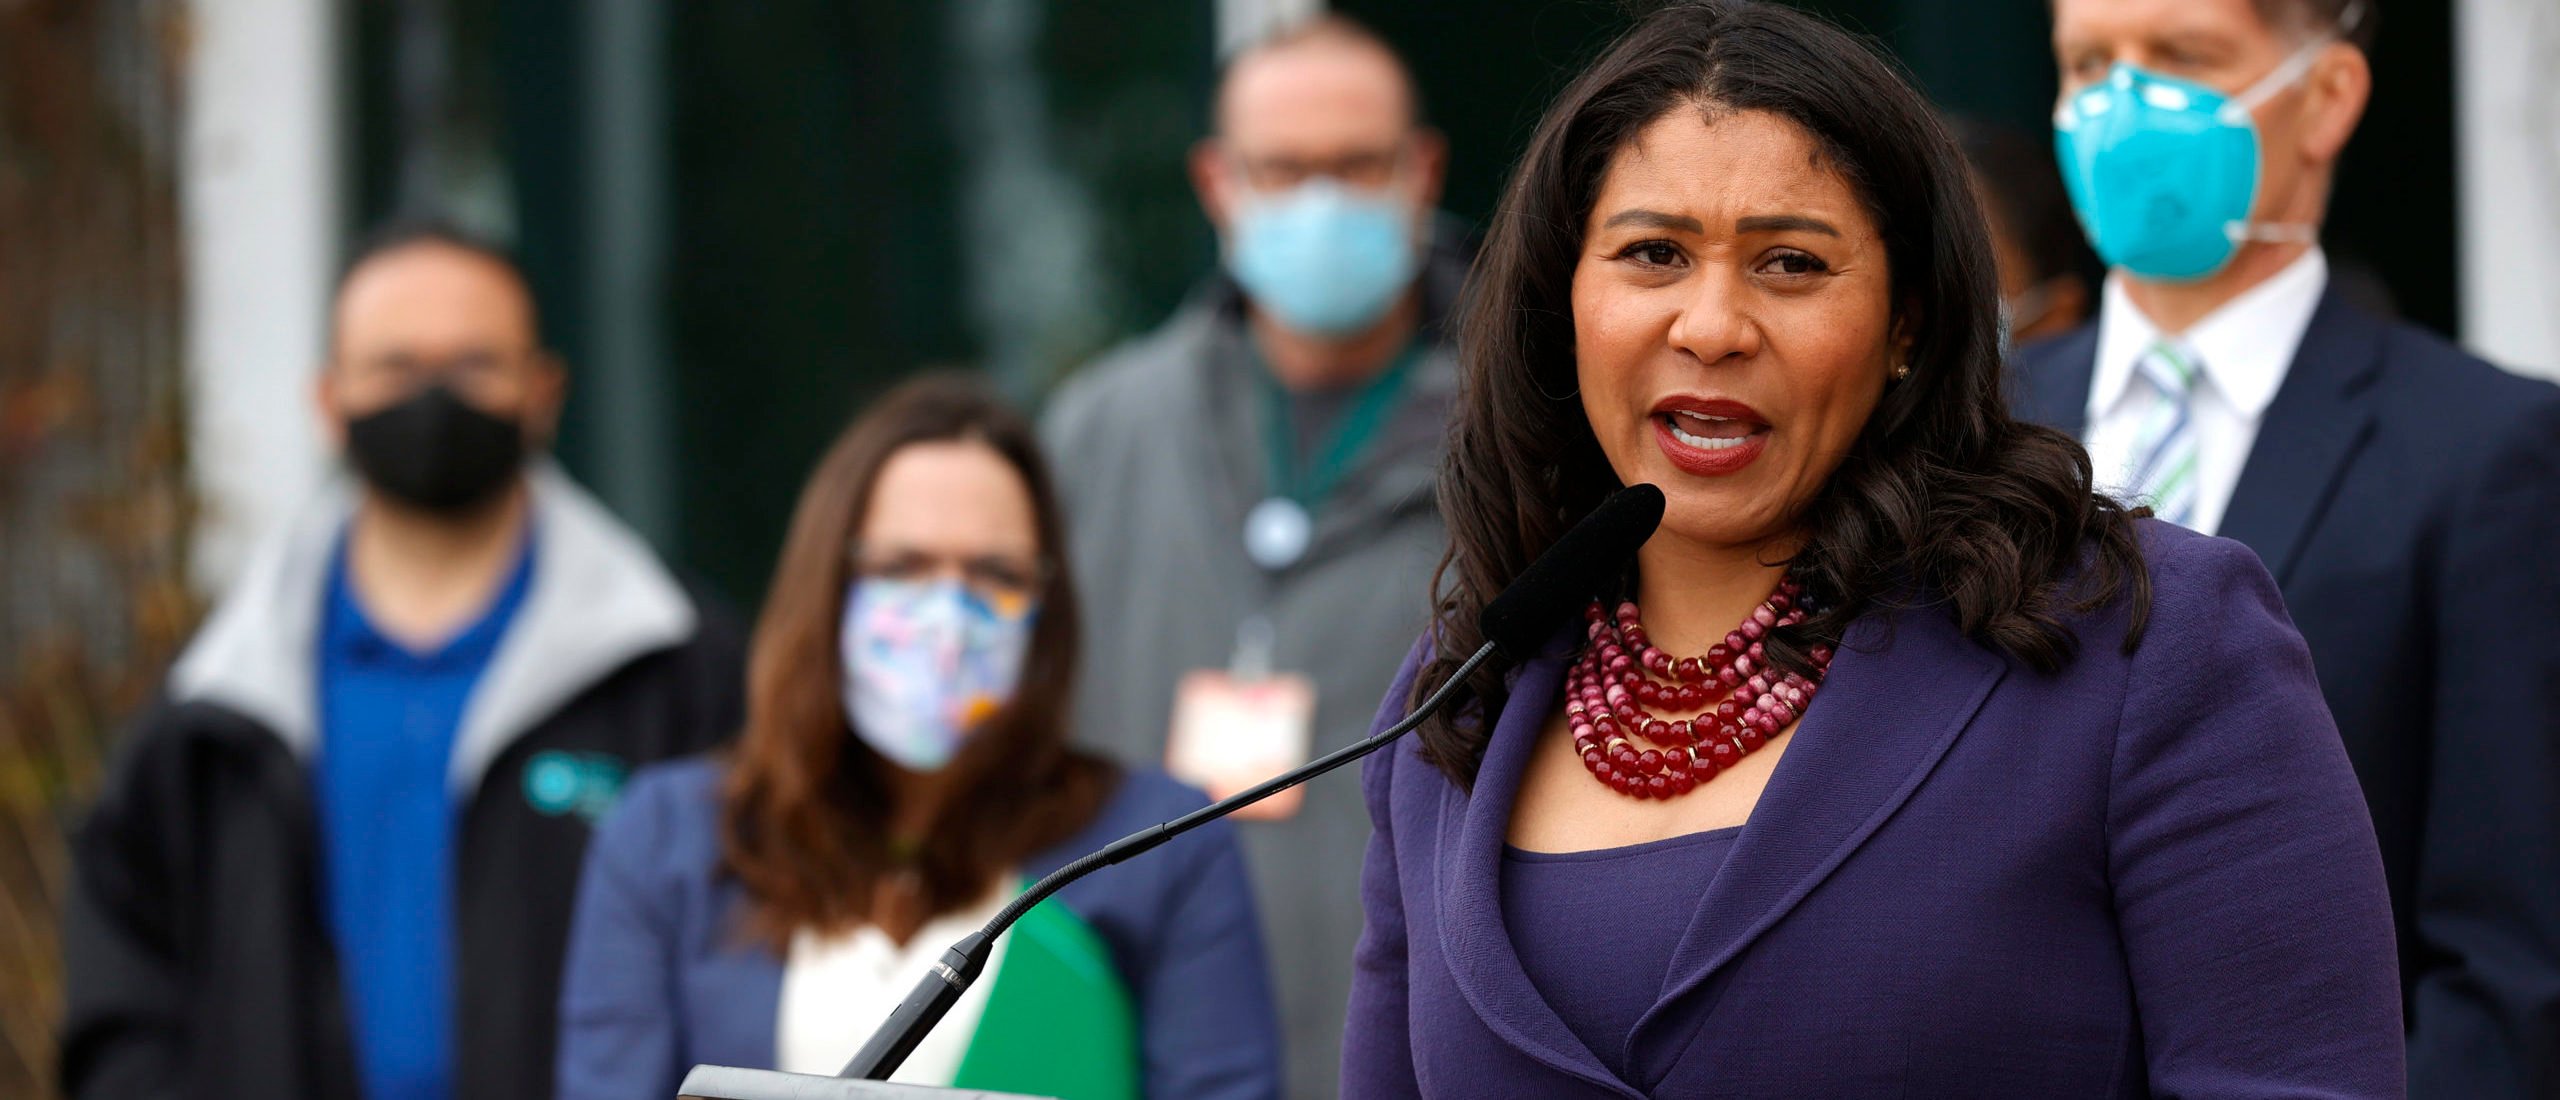 San Francisco Mayor London Breed speaks during a news conference outside of Zuckerberg San Francisco General Hospital with essential workers to mark the one year anniversary of the COVID-19 lockdown on March 17, 2021 in San Francisco, California. (Photo by Justin Sullivan/Getty Images)